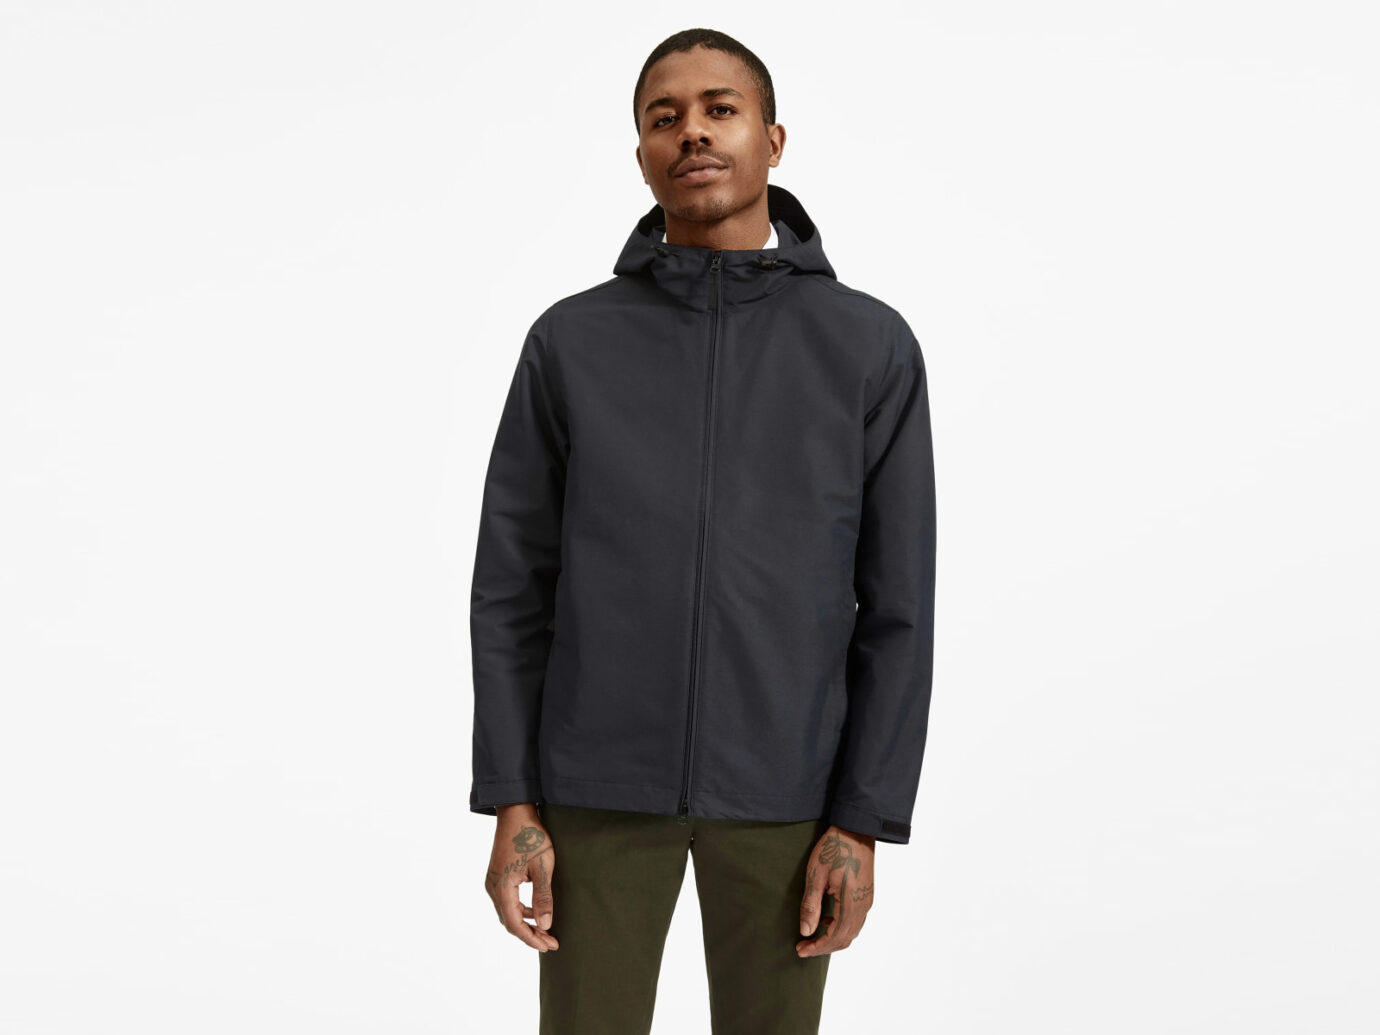 The ReNew All-Weather Jacket